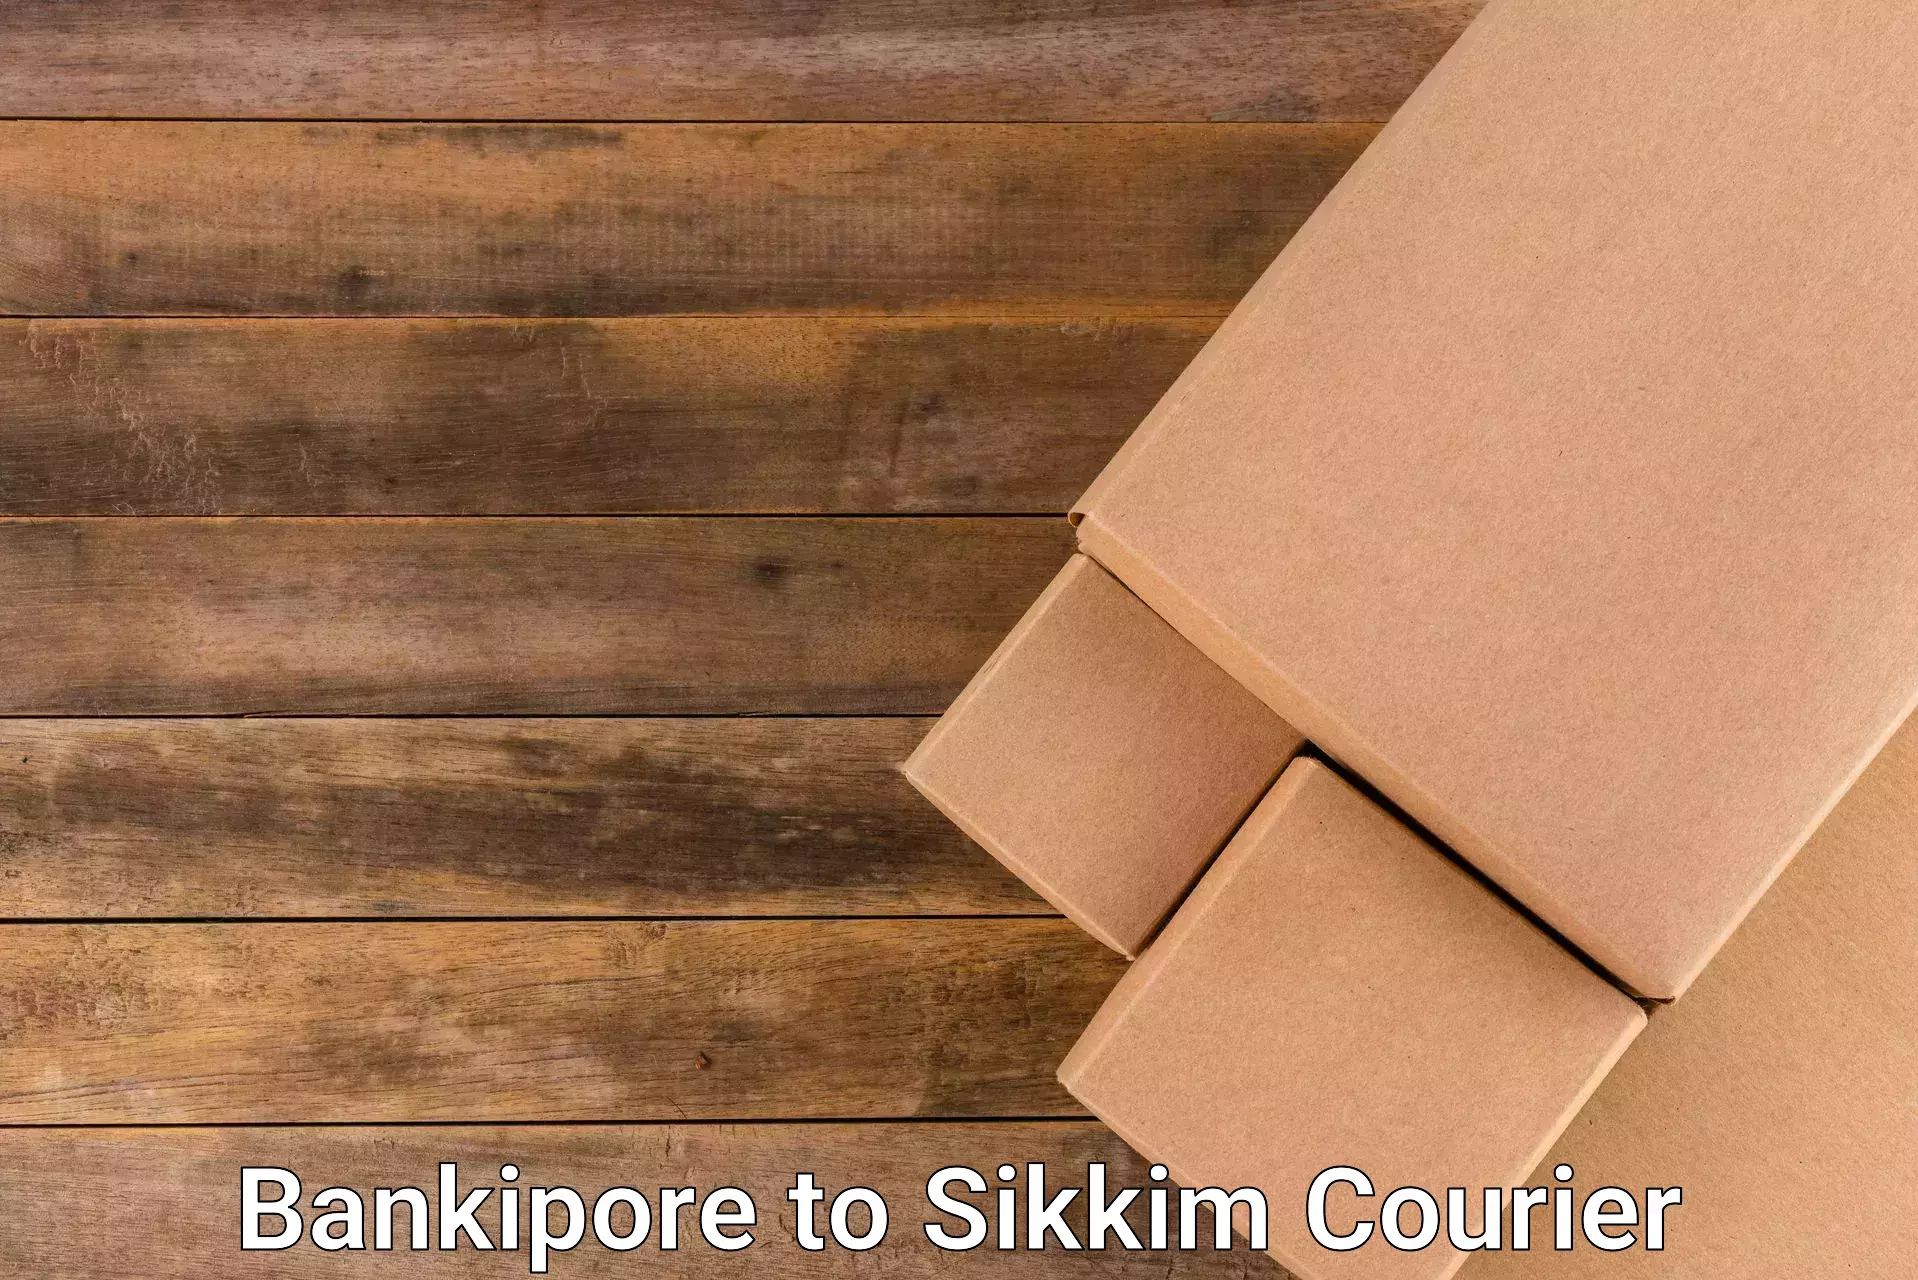 Express delivery capabilities in Bankipore to Gangtok